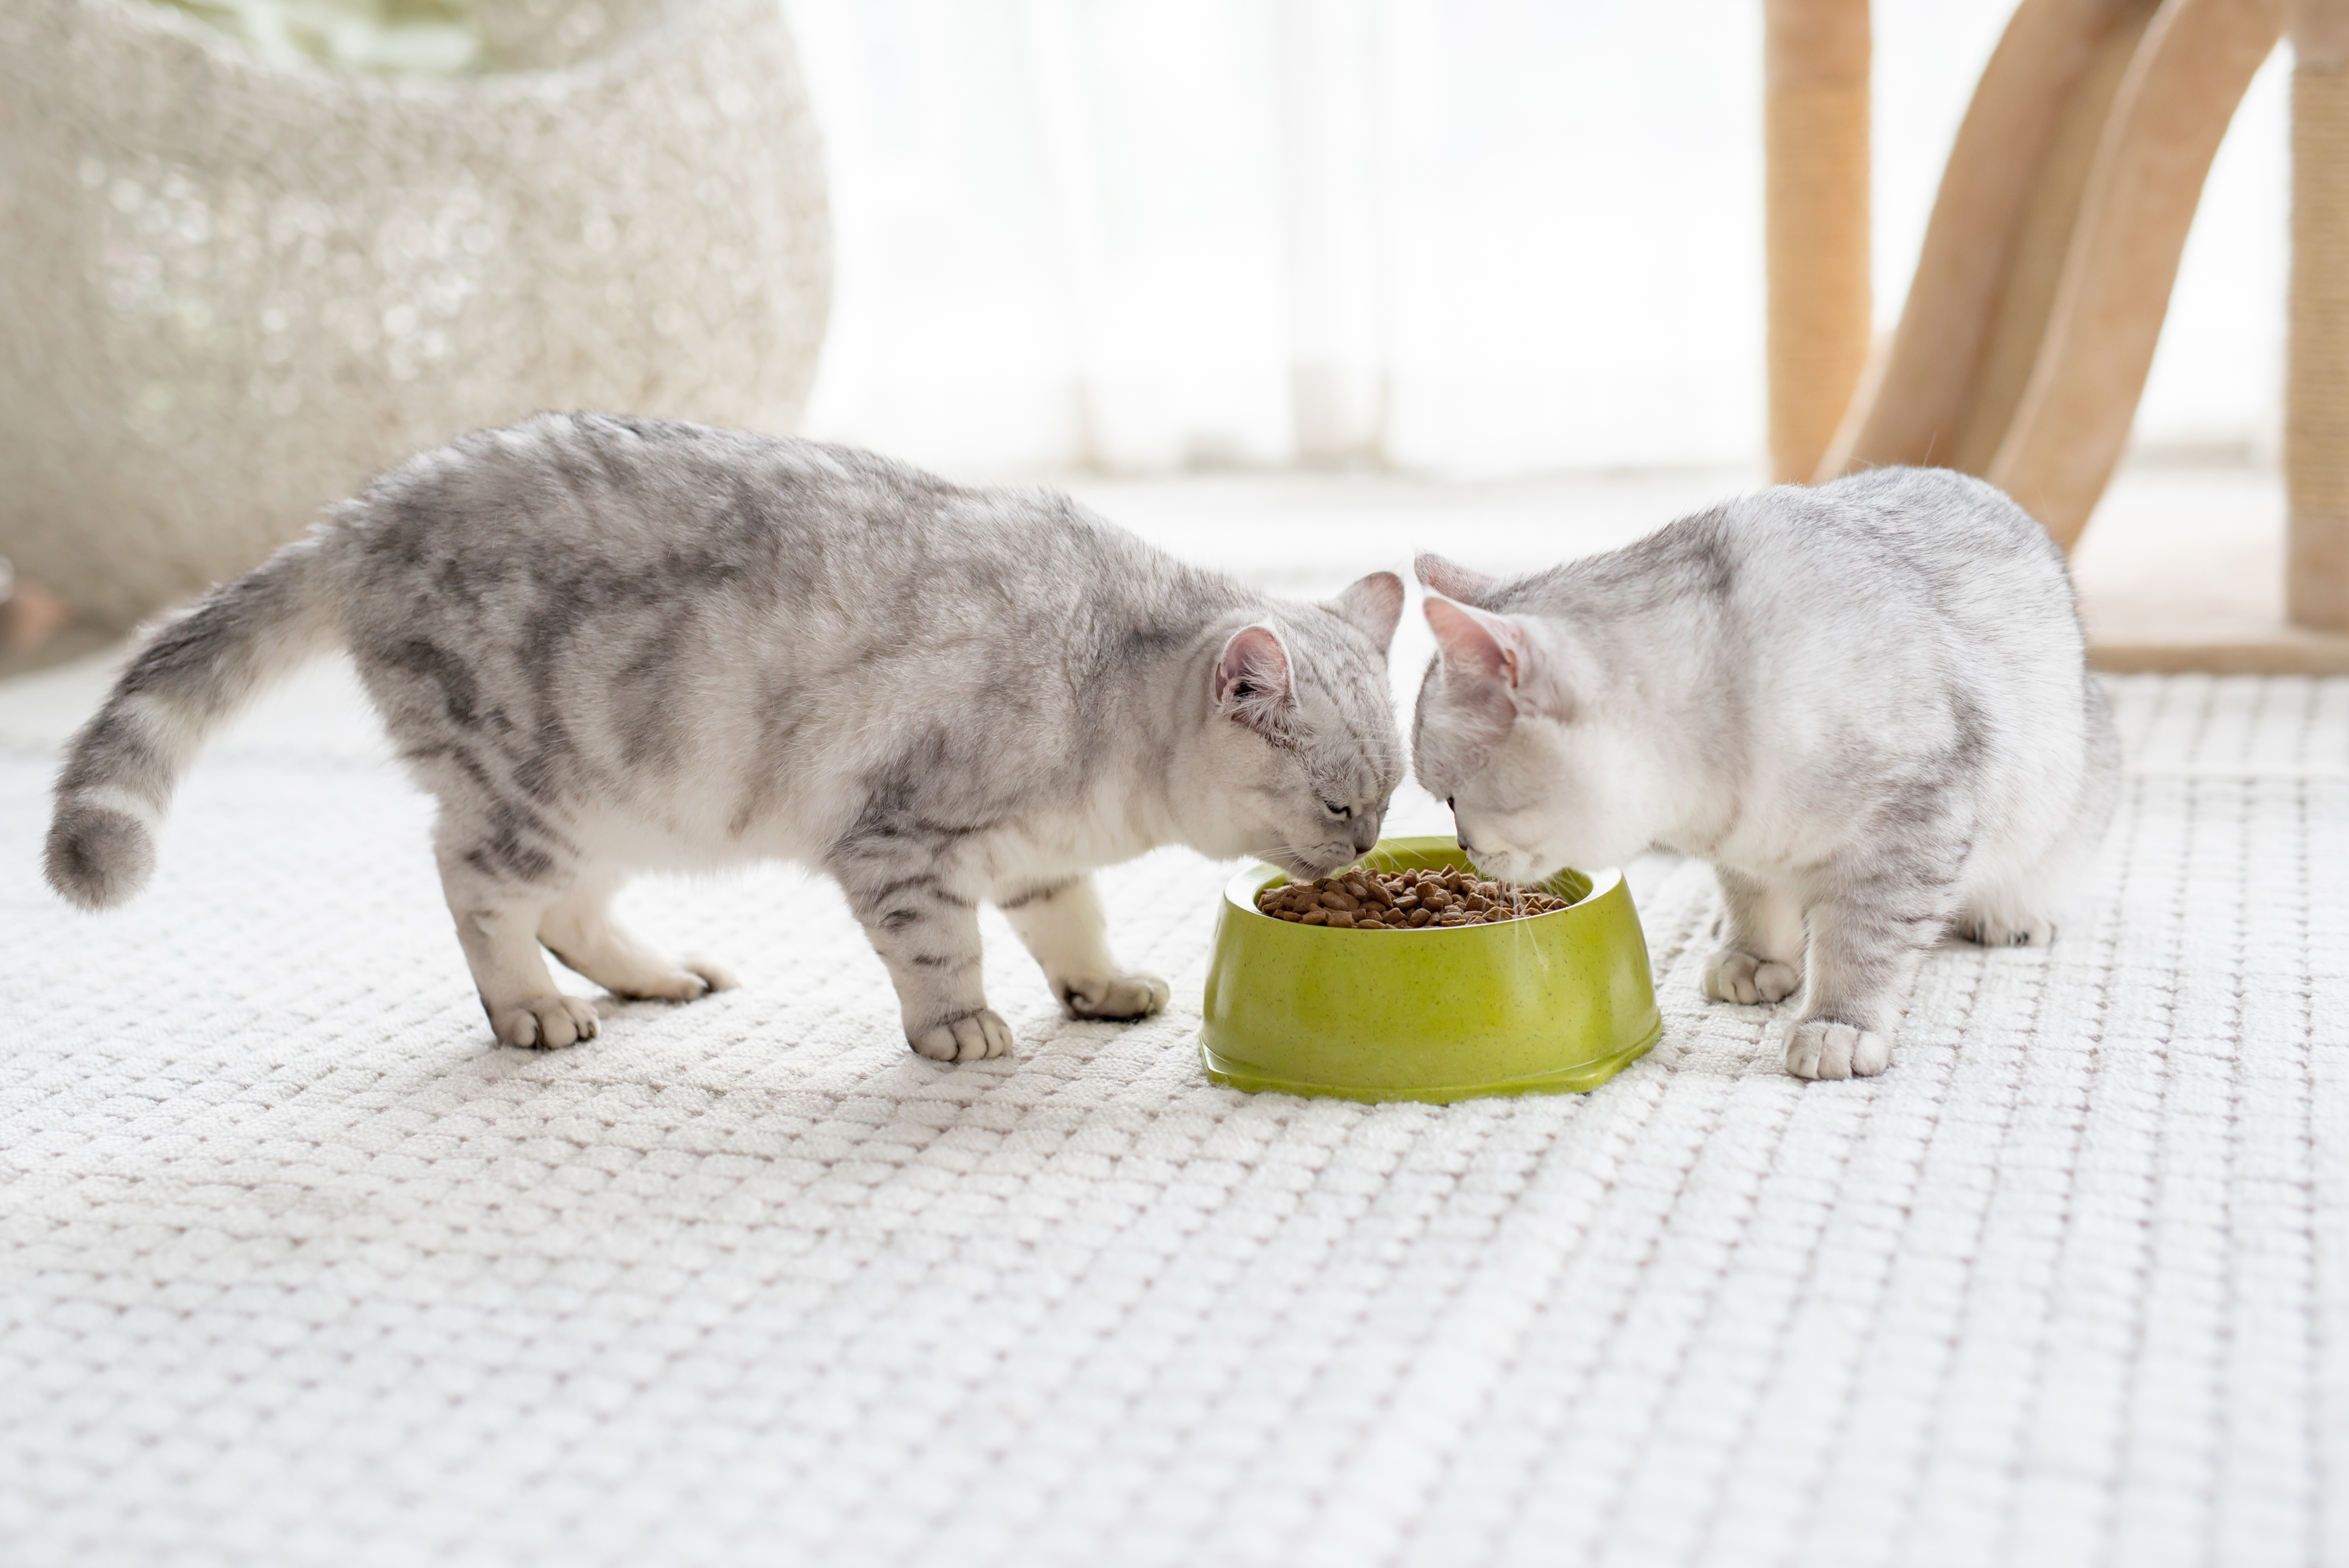 Two cats eating in a bowl